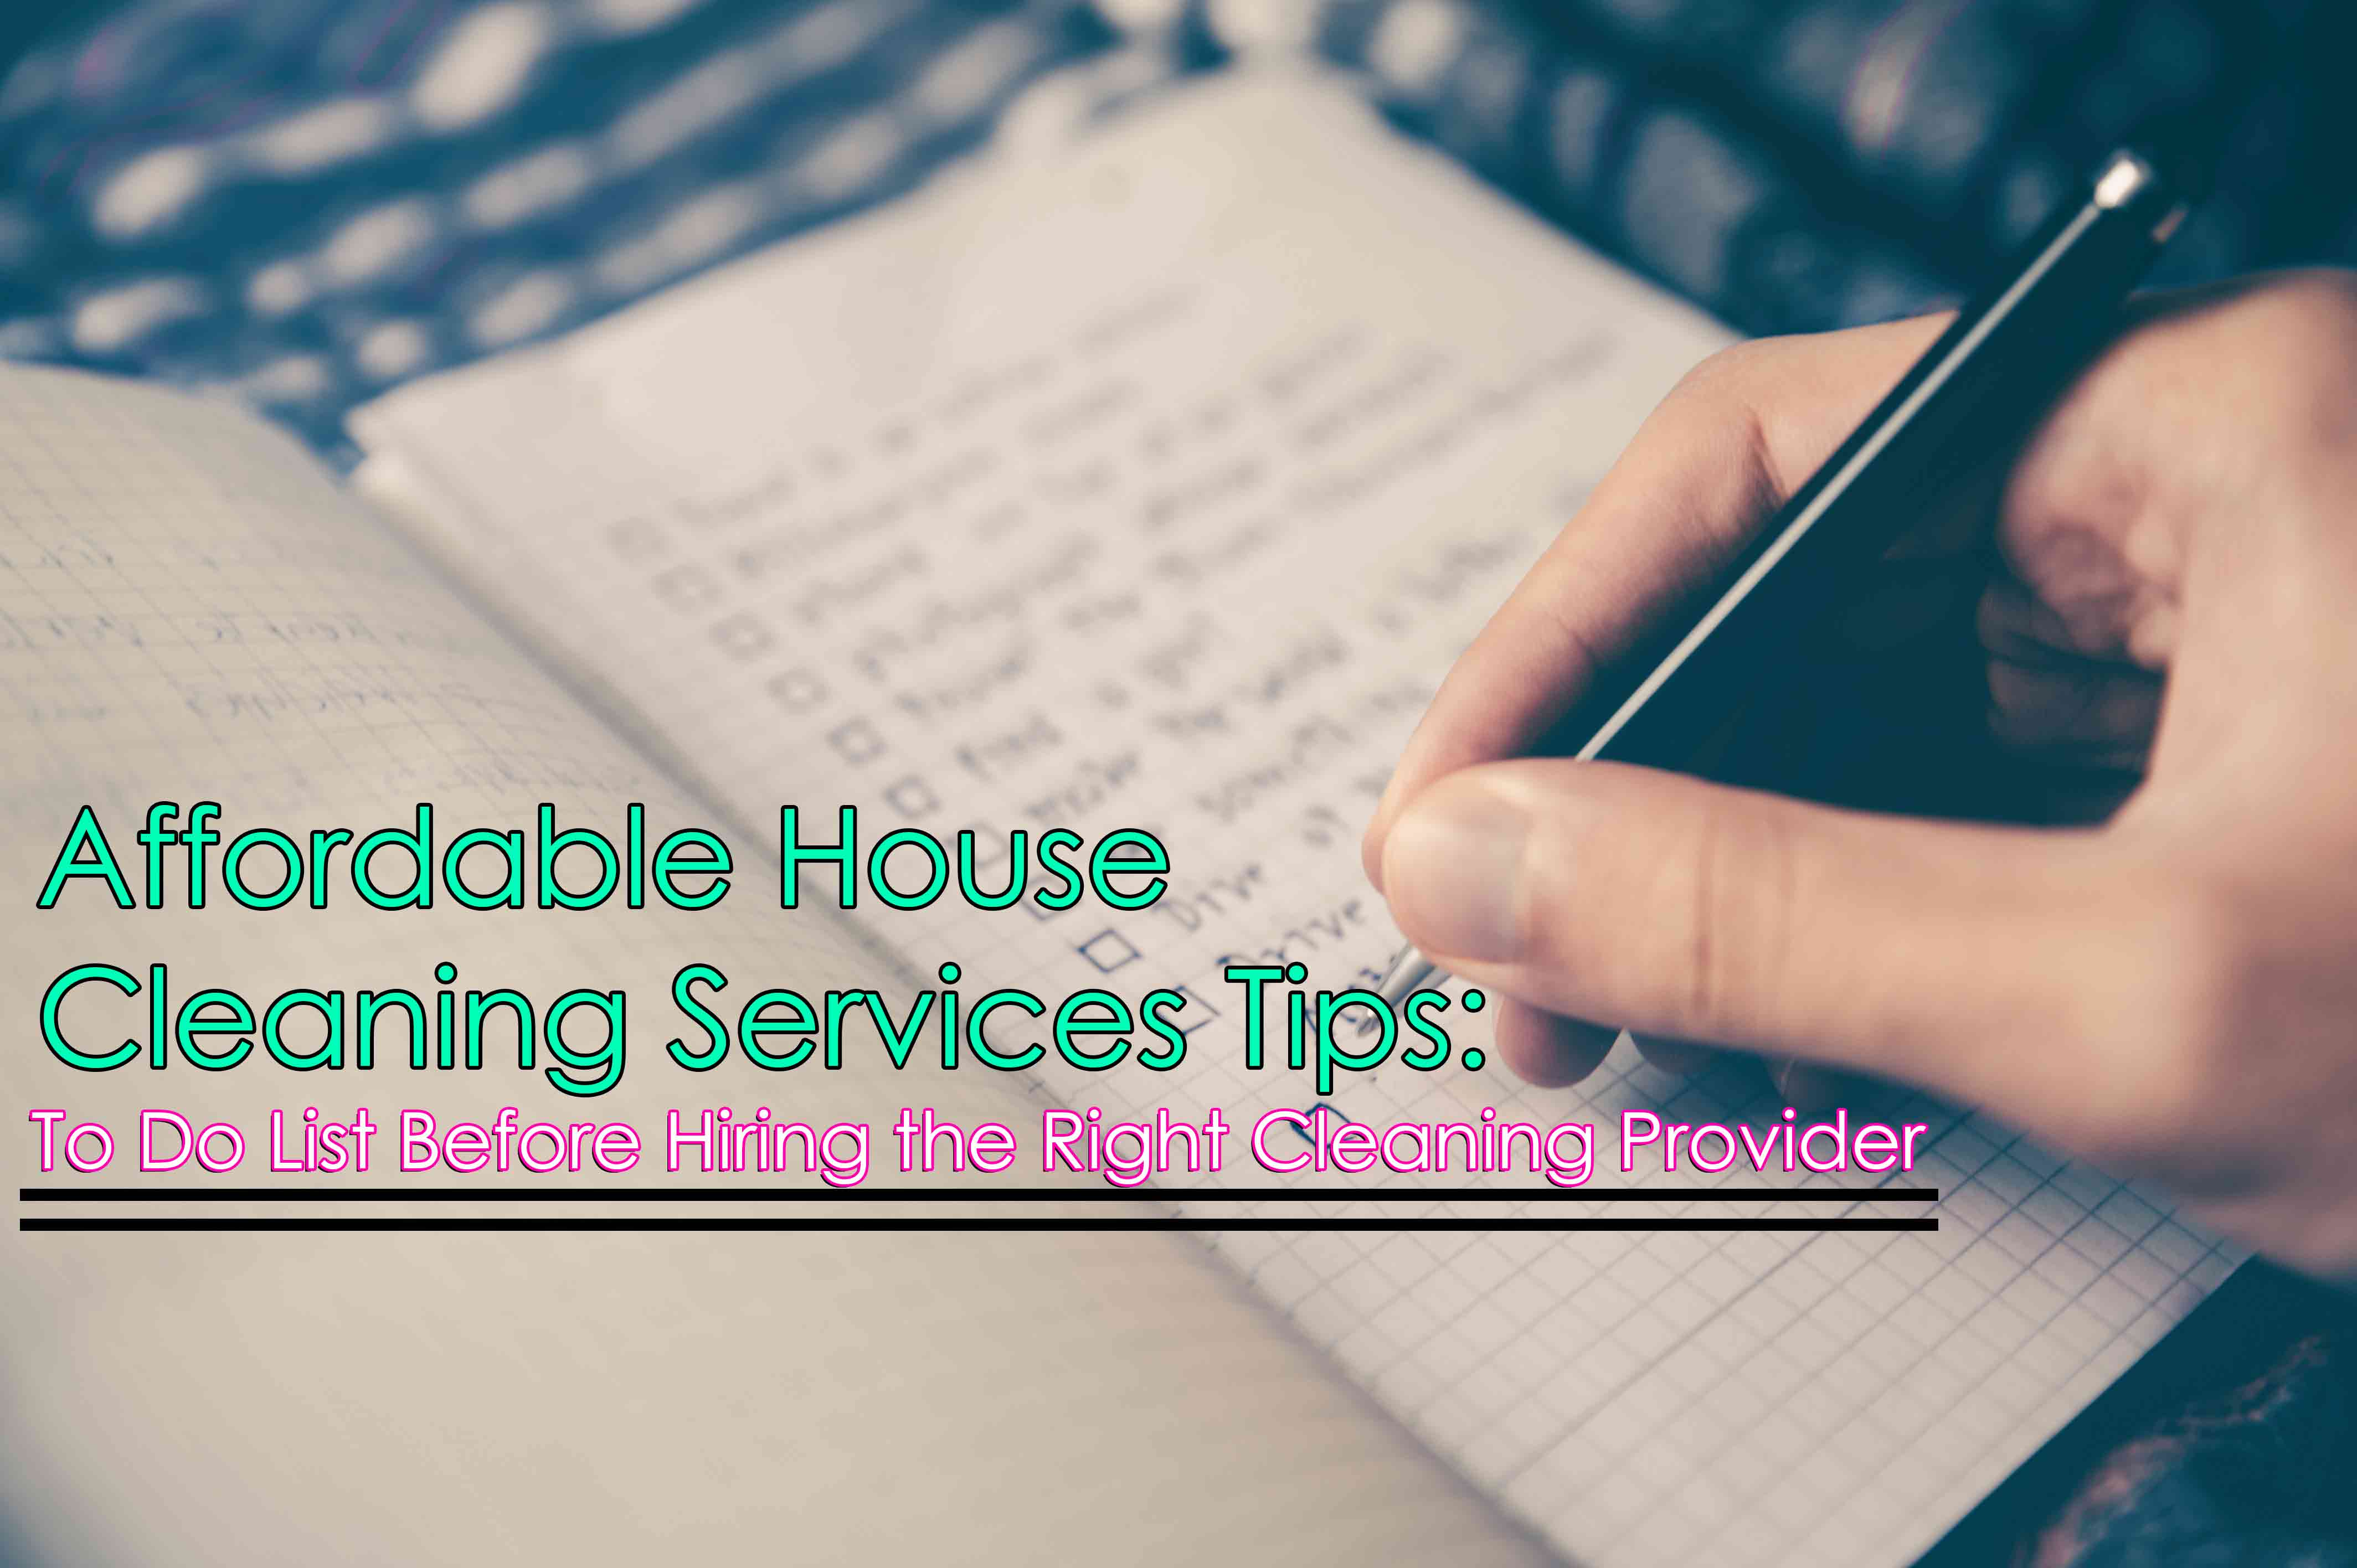 Affordable House Cleaning Services Tips: To Do List Before Hiring the Right Cleaning Provider